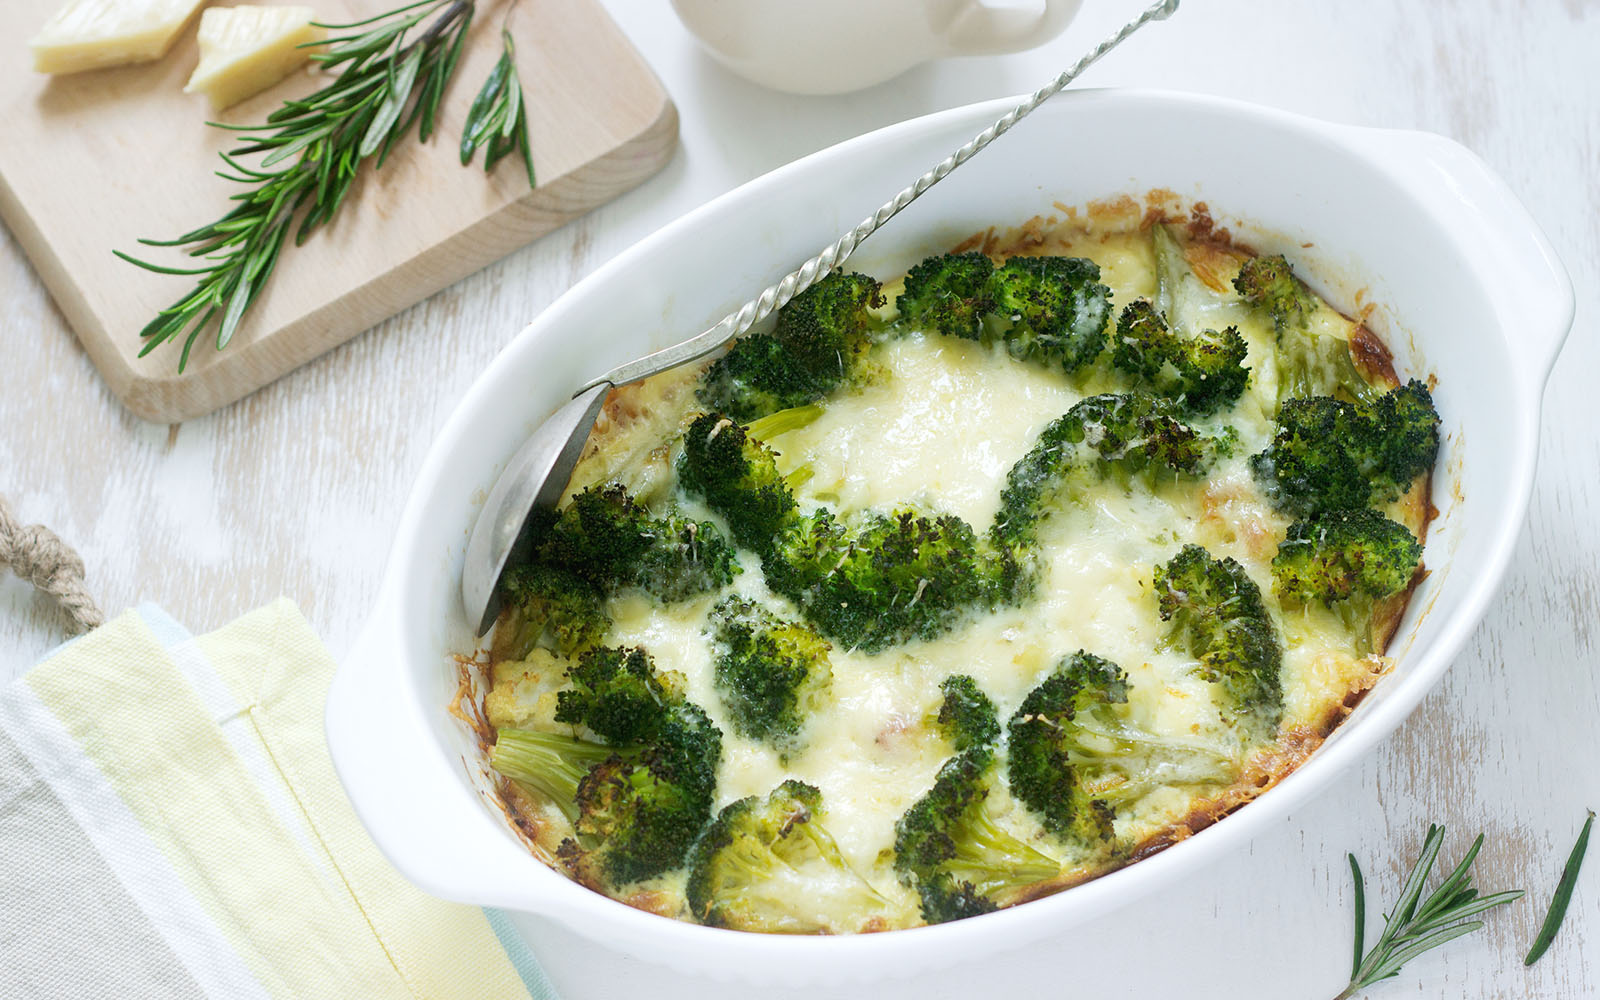 How to cook broccoli for those who always want potatoes